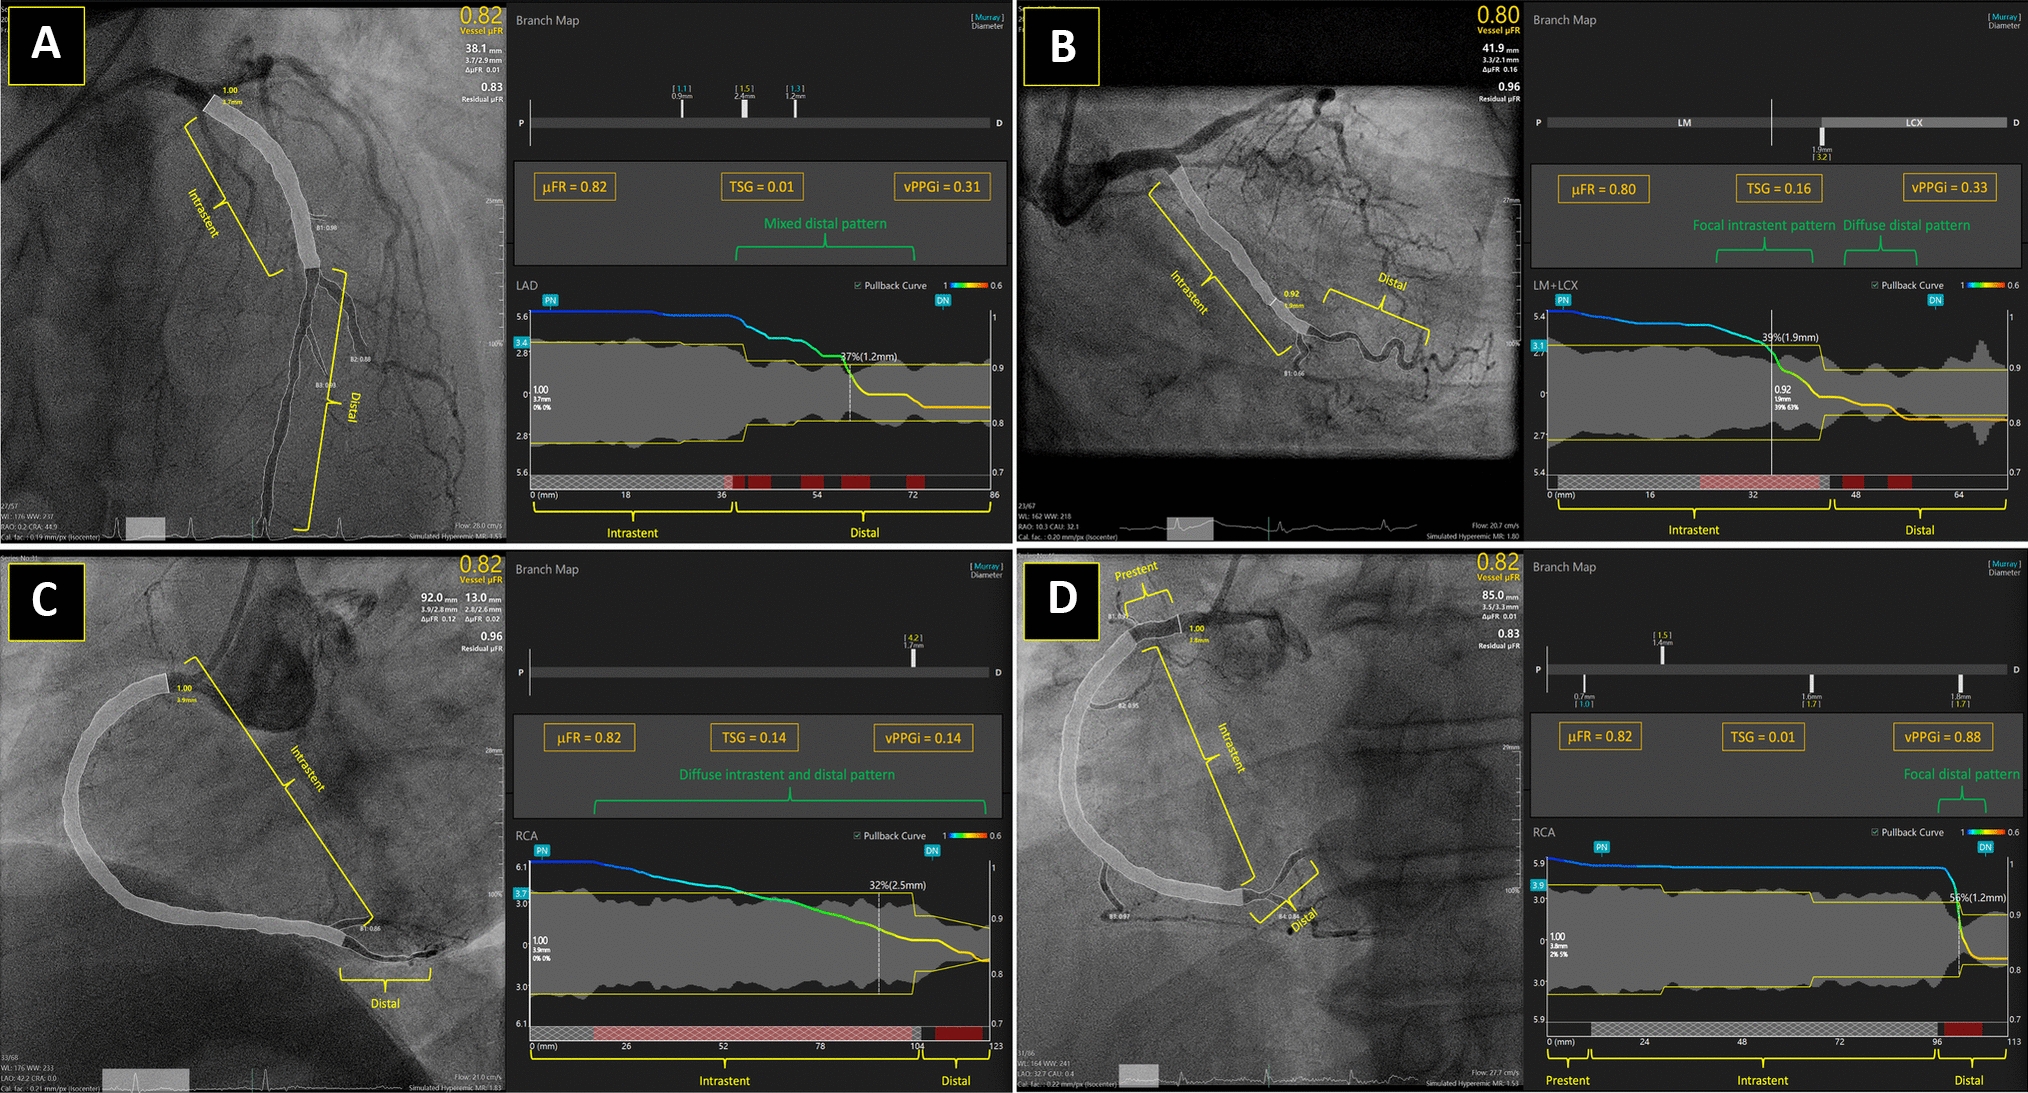 Angiography-derived physiological assessment after percutaneous coronary intervention of chronic total occlusions